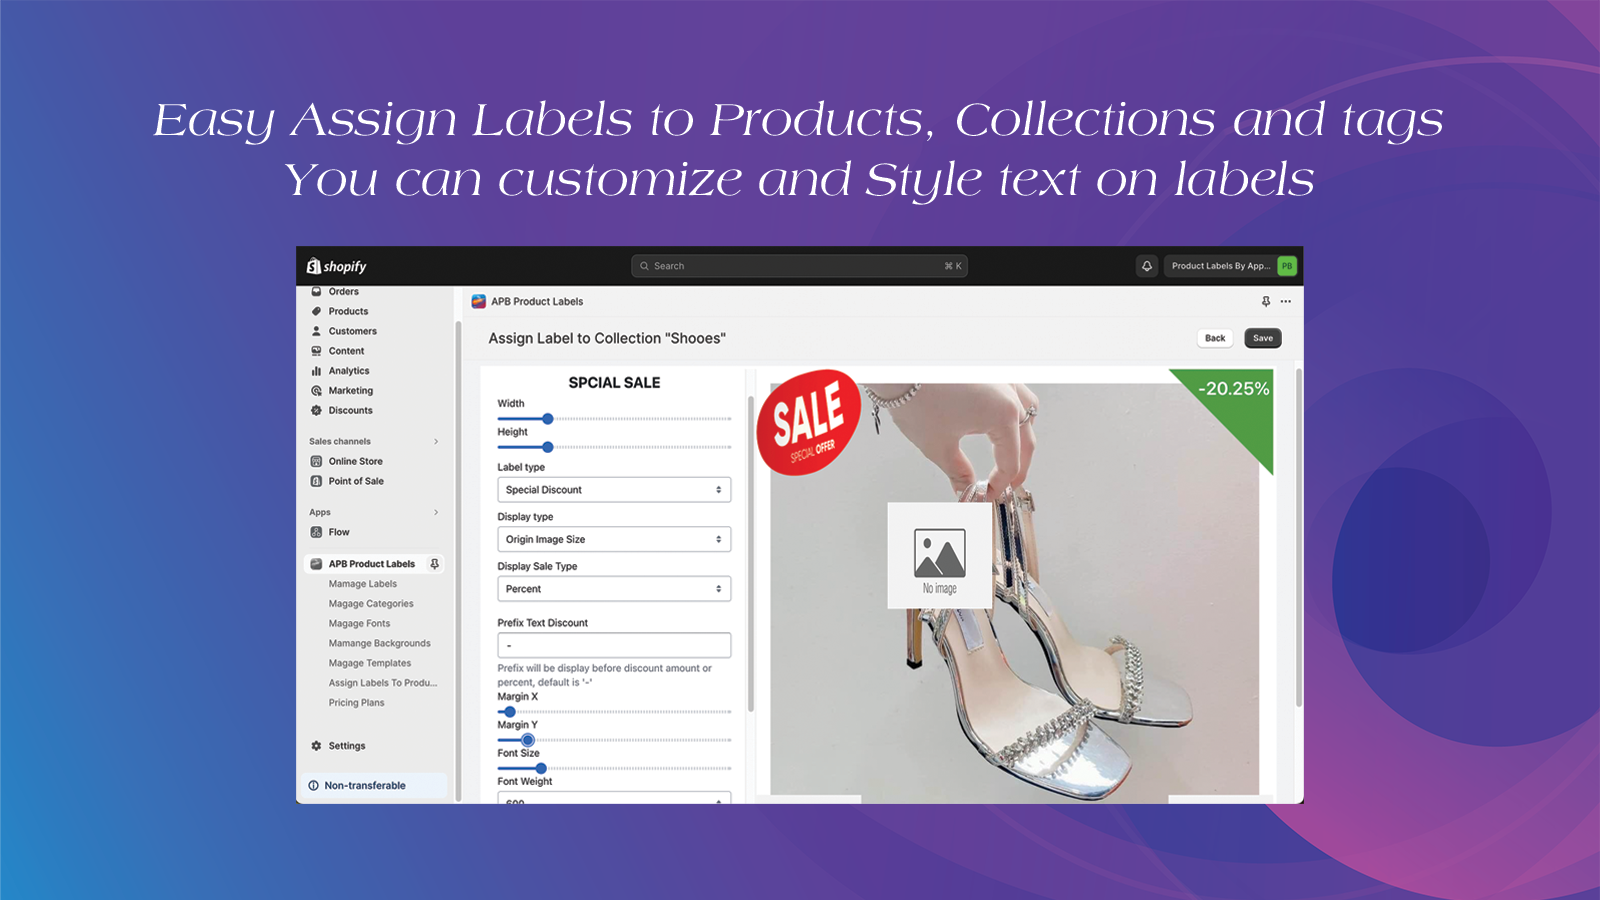 Assign Labels To Products, Collections and Tags